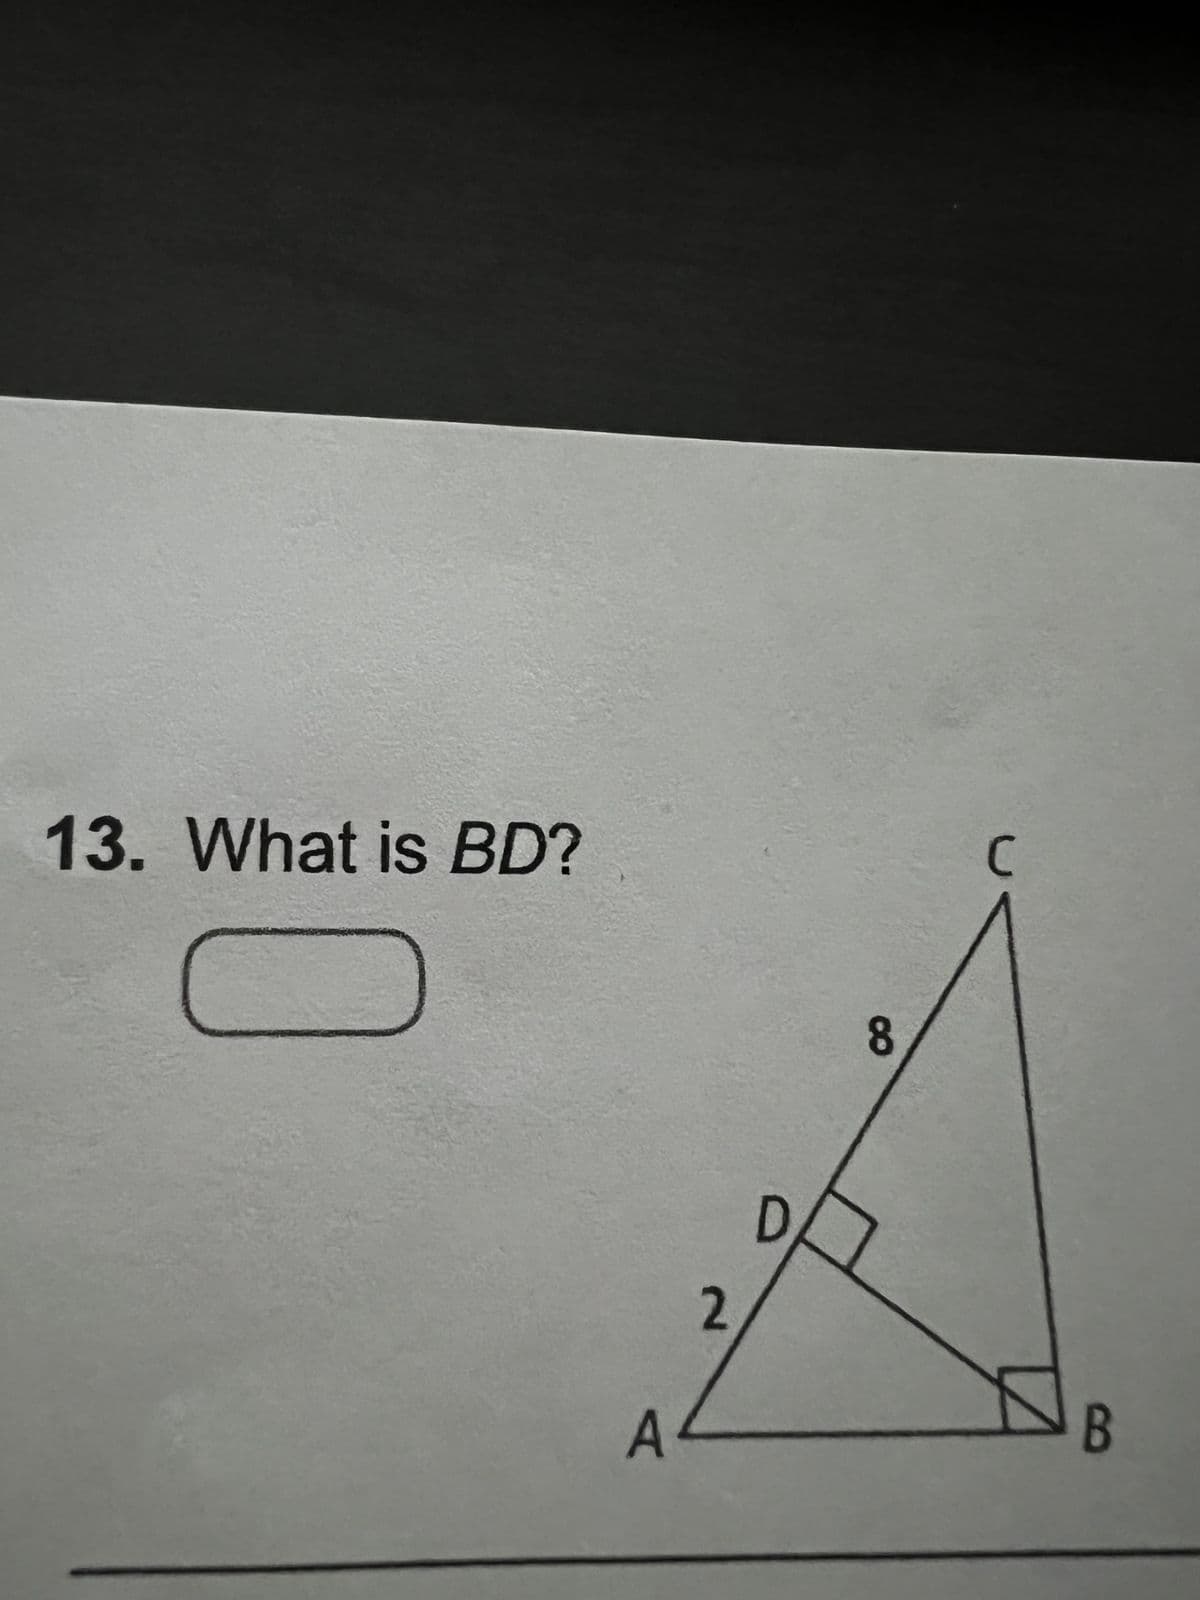 13. What is BD?
A
2
D
8
C